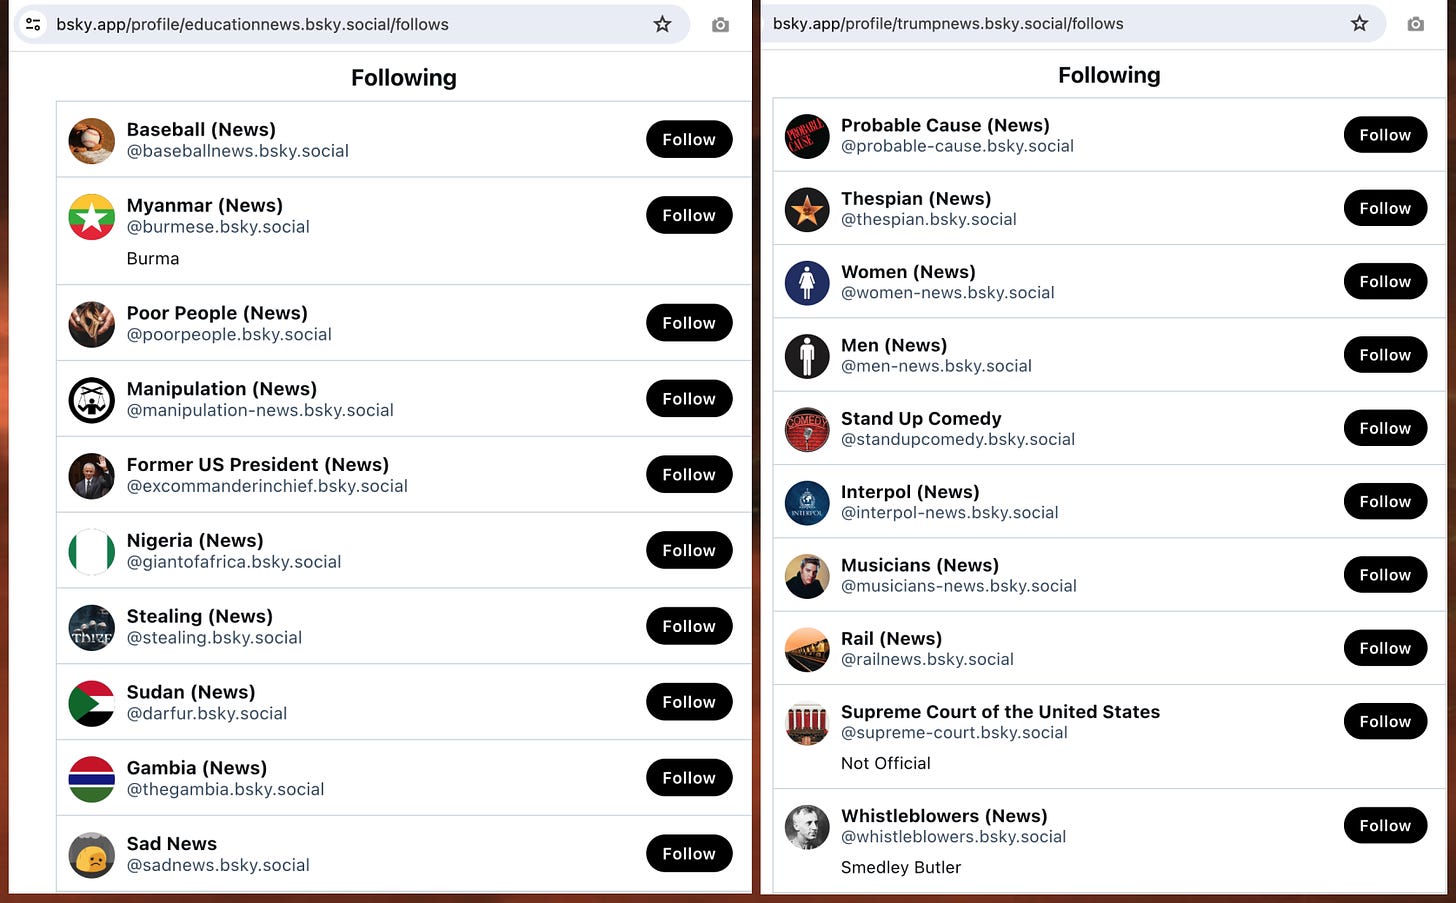 screenshots of the Following tab of two of the spam accounts